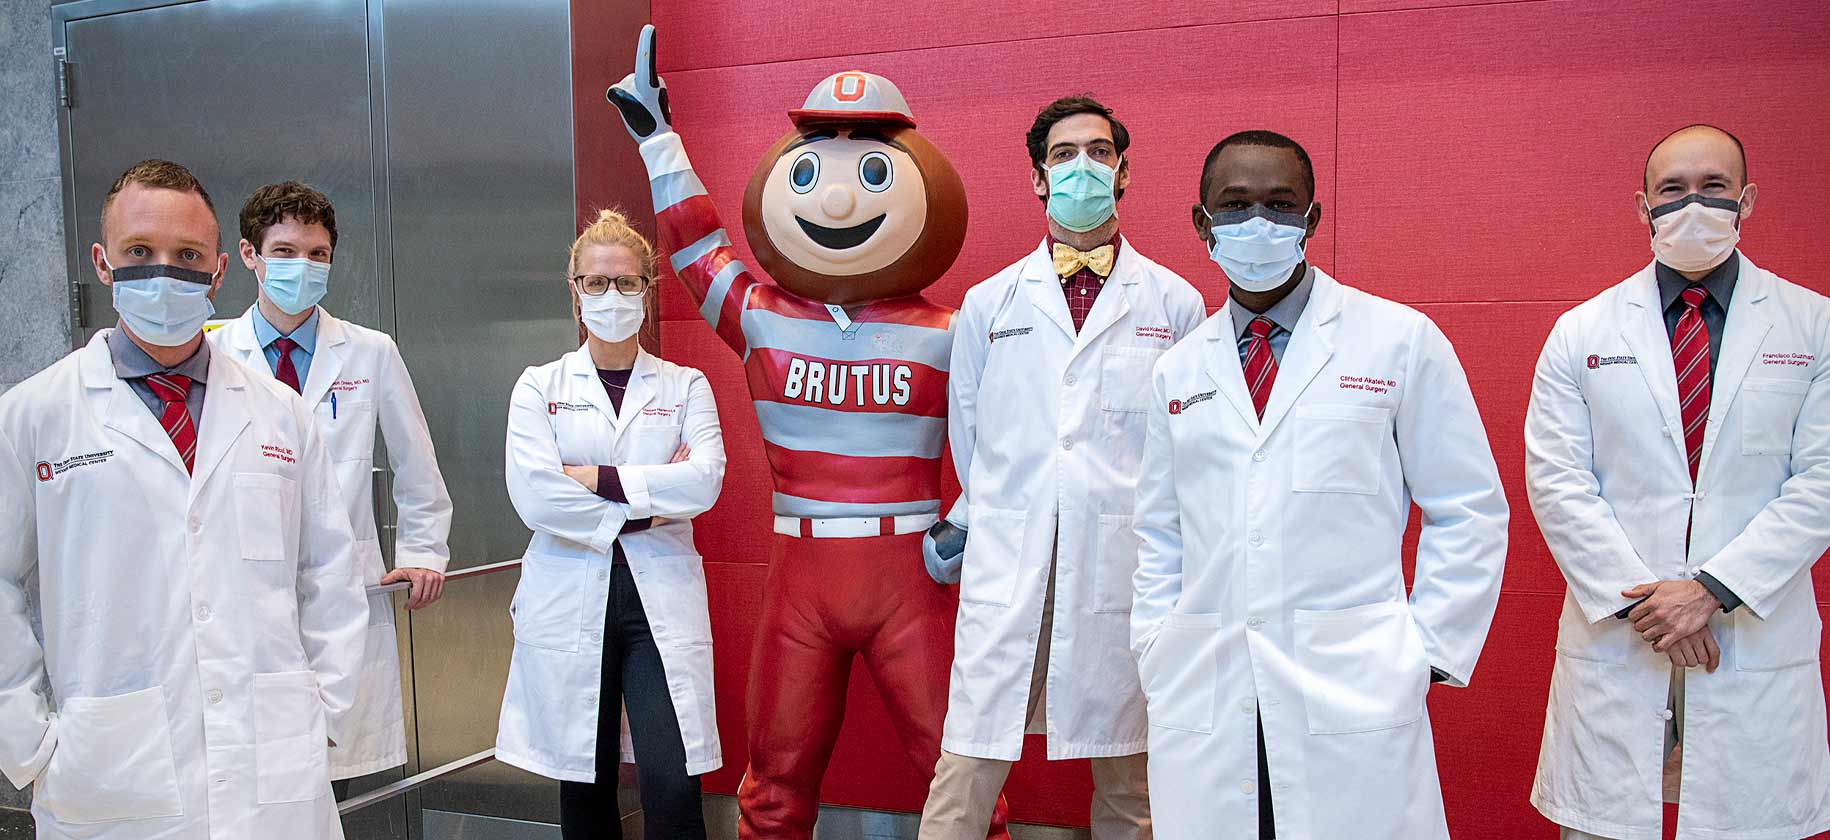 Surgery residents in masks with Brutus Buckeye